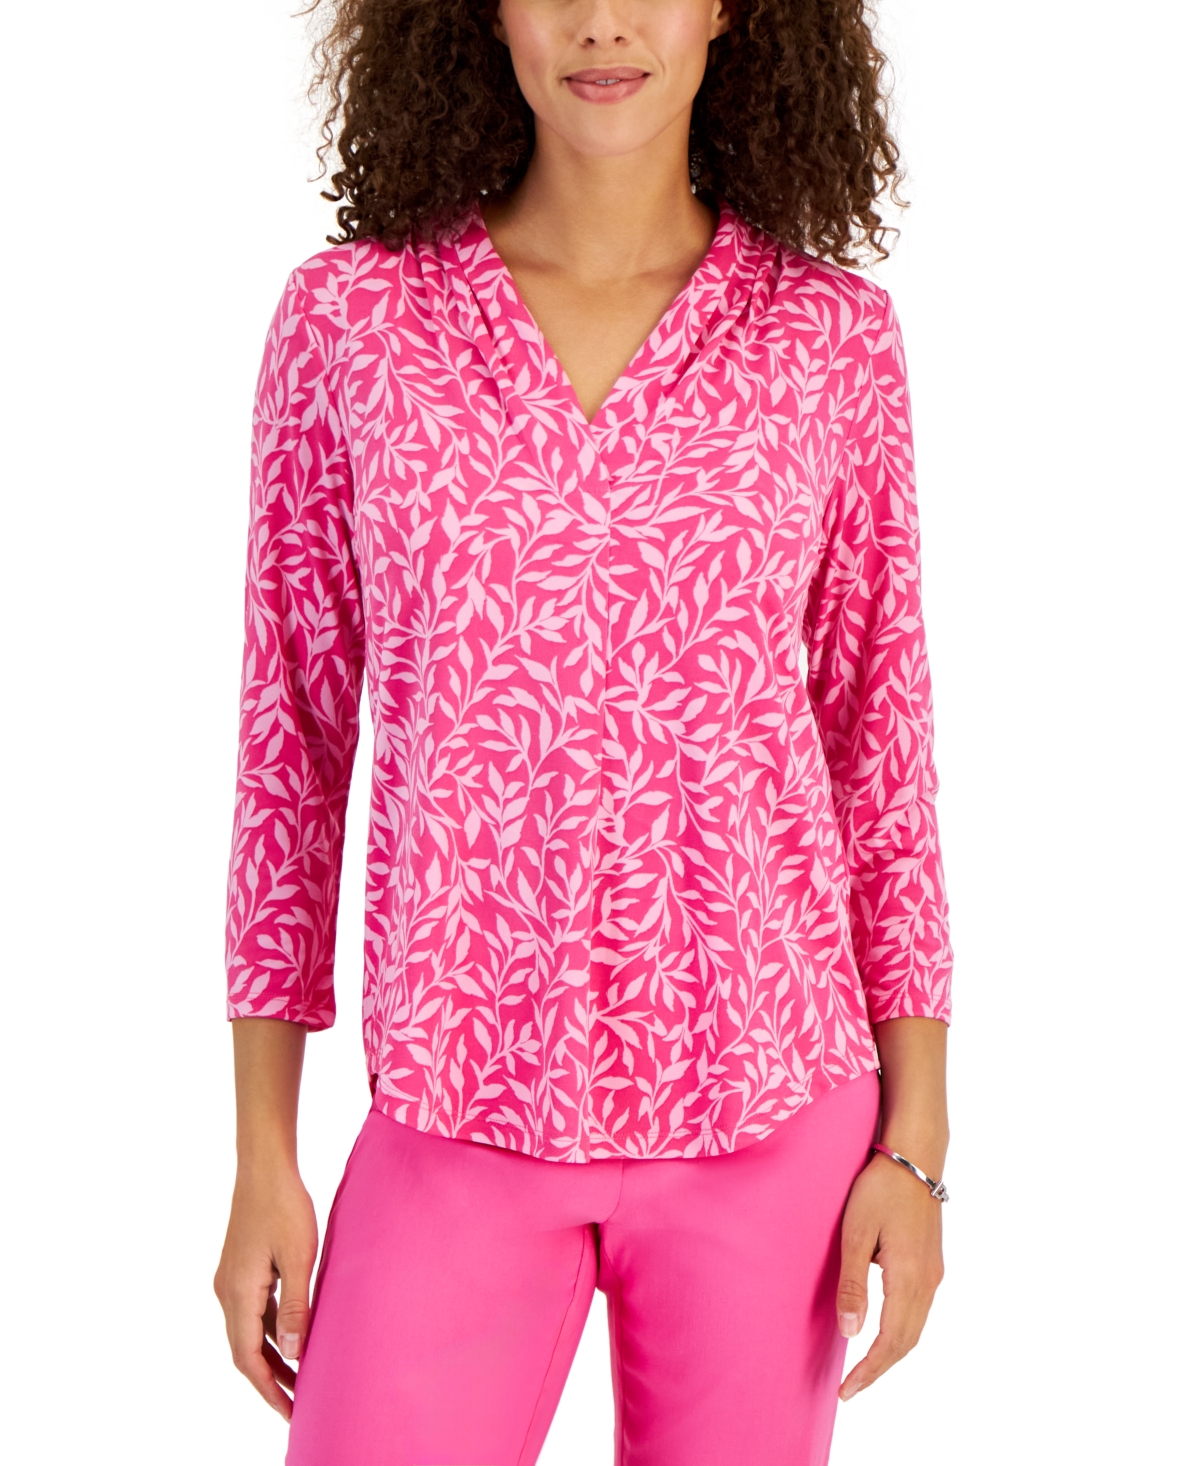 Women's Printed 3/4 Sleeve V-Neck Top, Created for Macy's - Divine Berry Combo